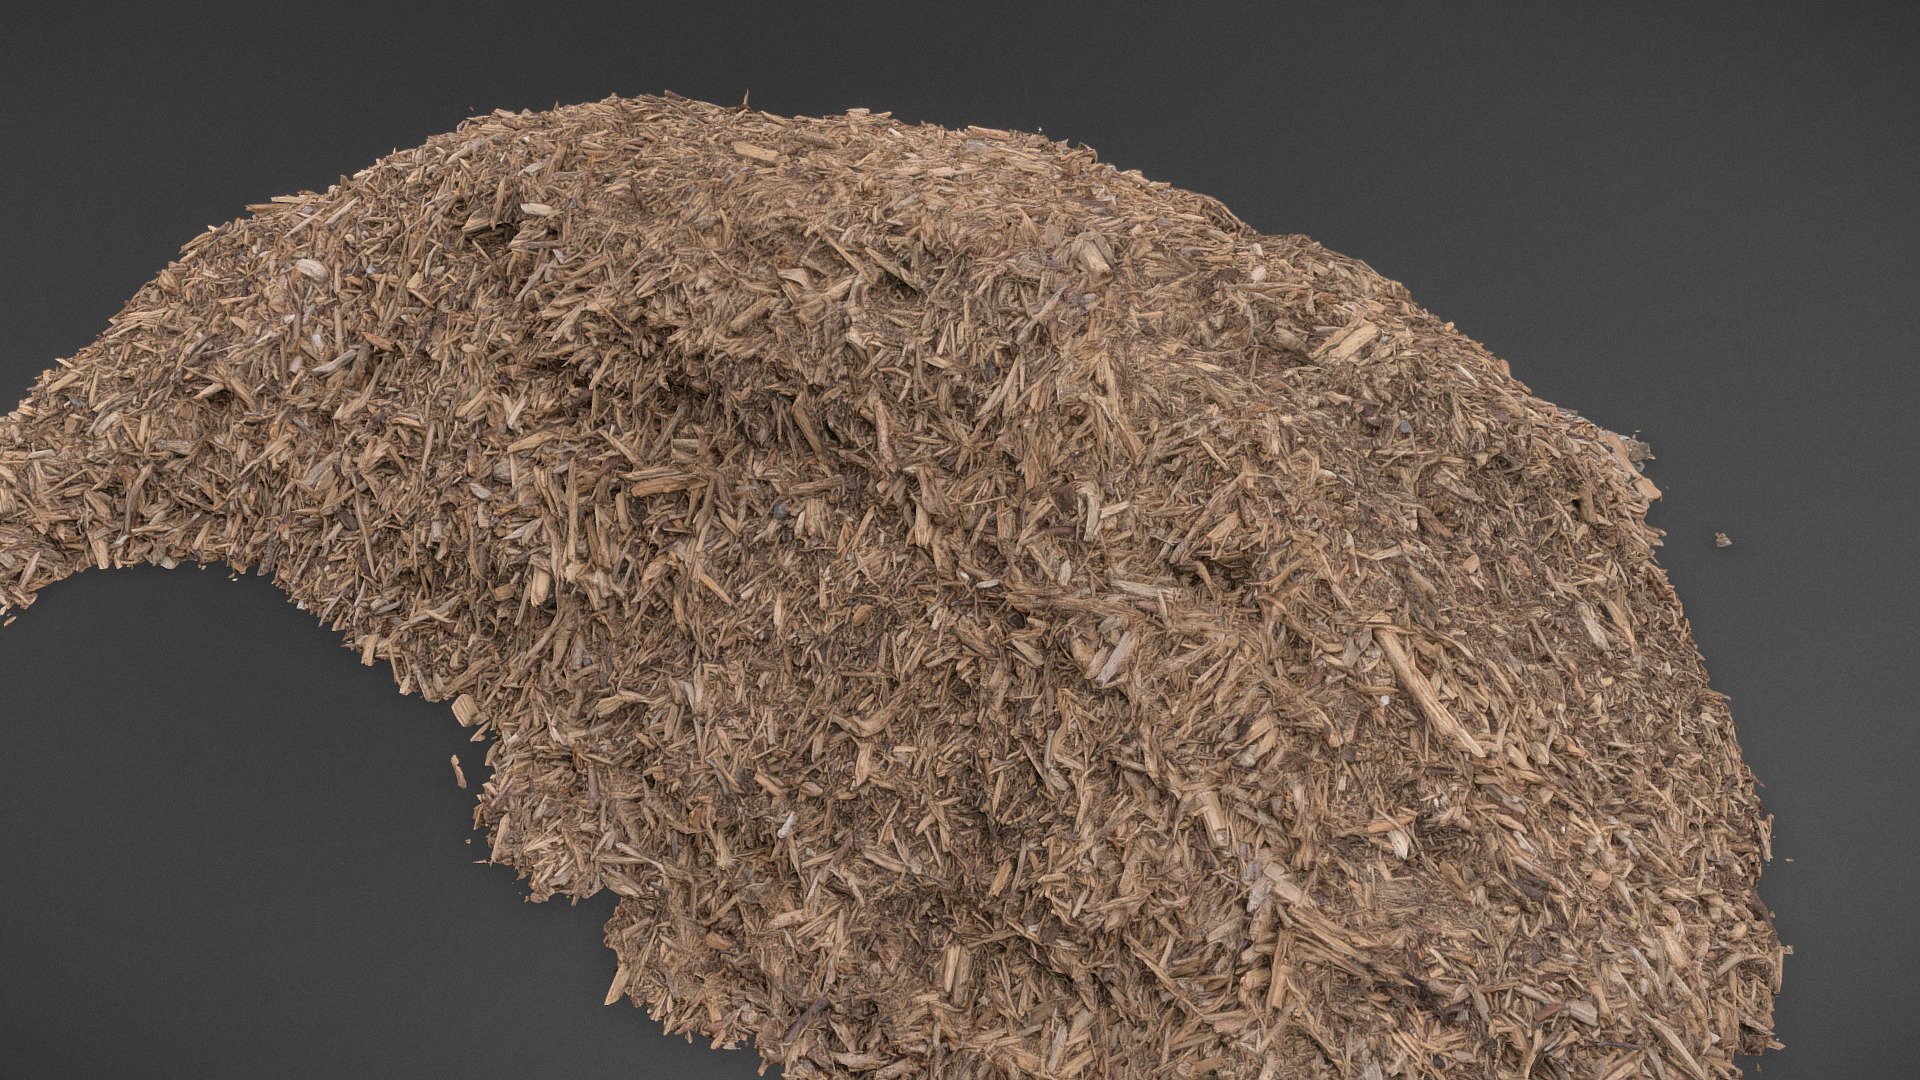 Wood shredded wood woodchips wooden chips shards mulch pulp bark pile heap

photogrammetry scan (150x24mp), 4x8k textures + hd normals - Shredded wood chips pile - Buy Royalty Free 3D model by matousekfoto 3d model